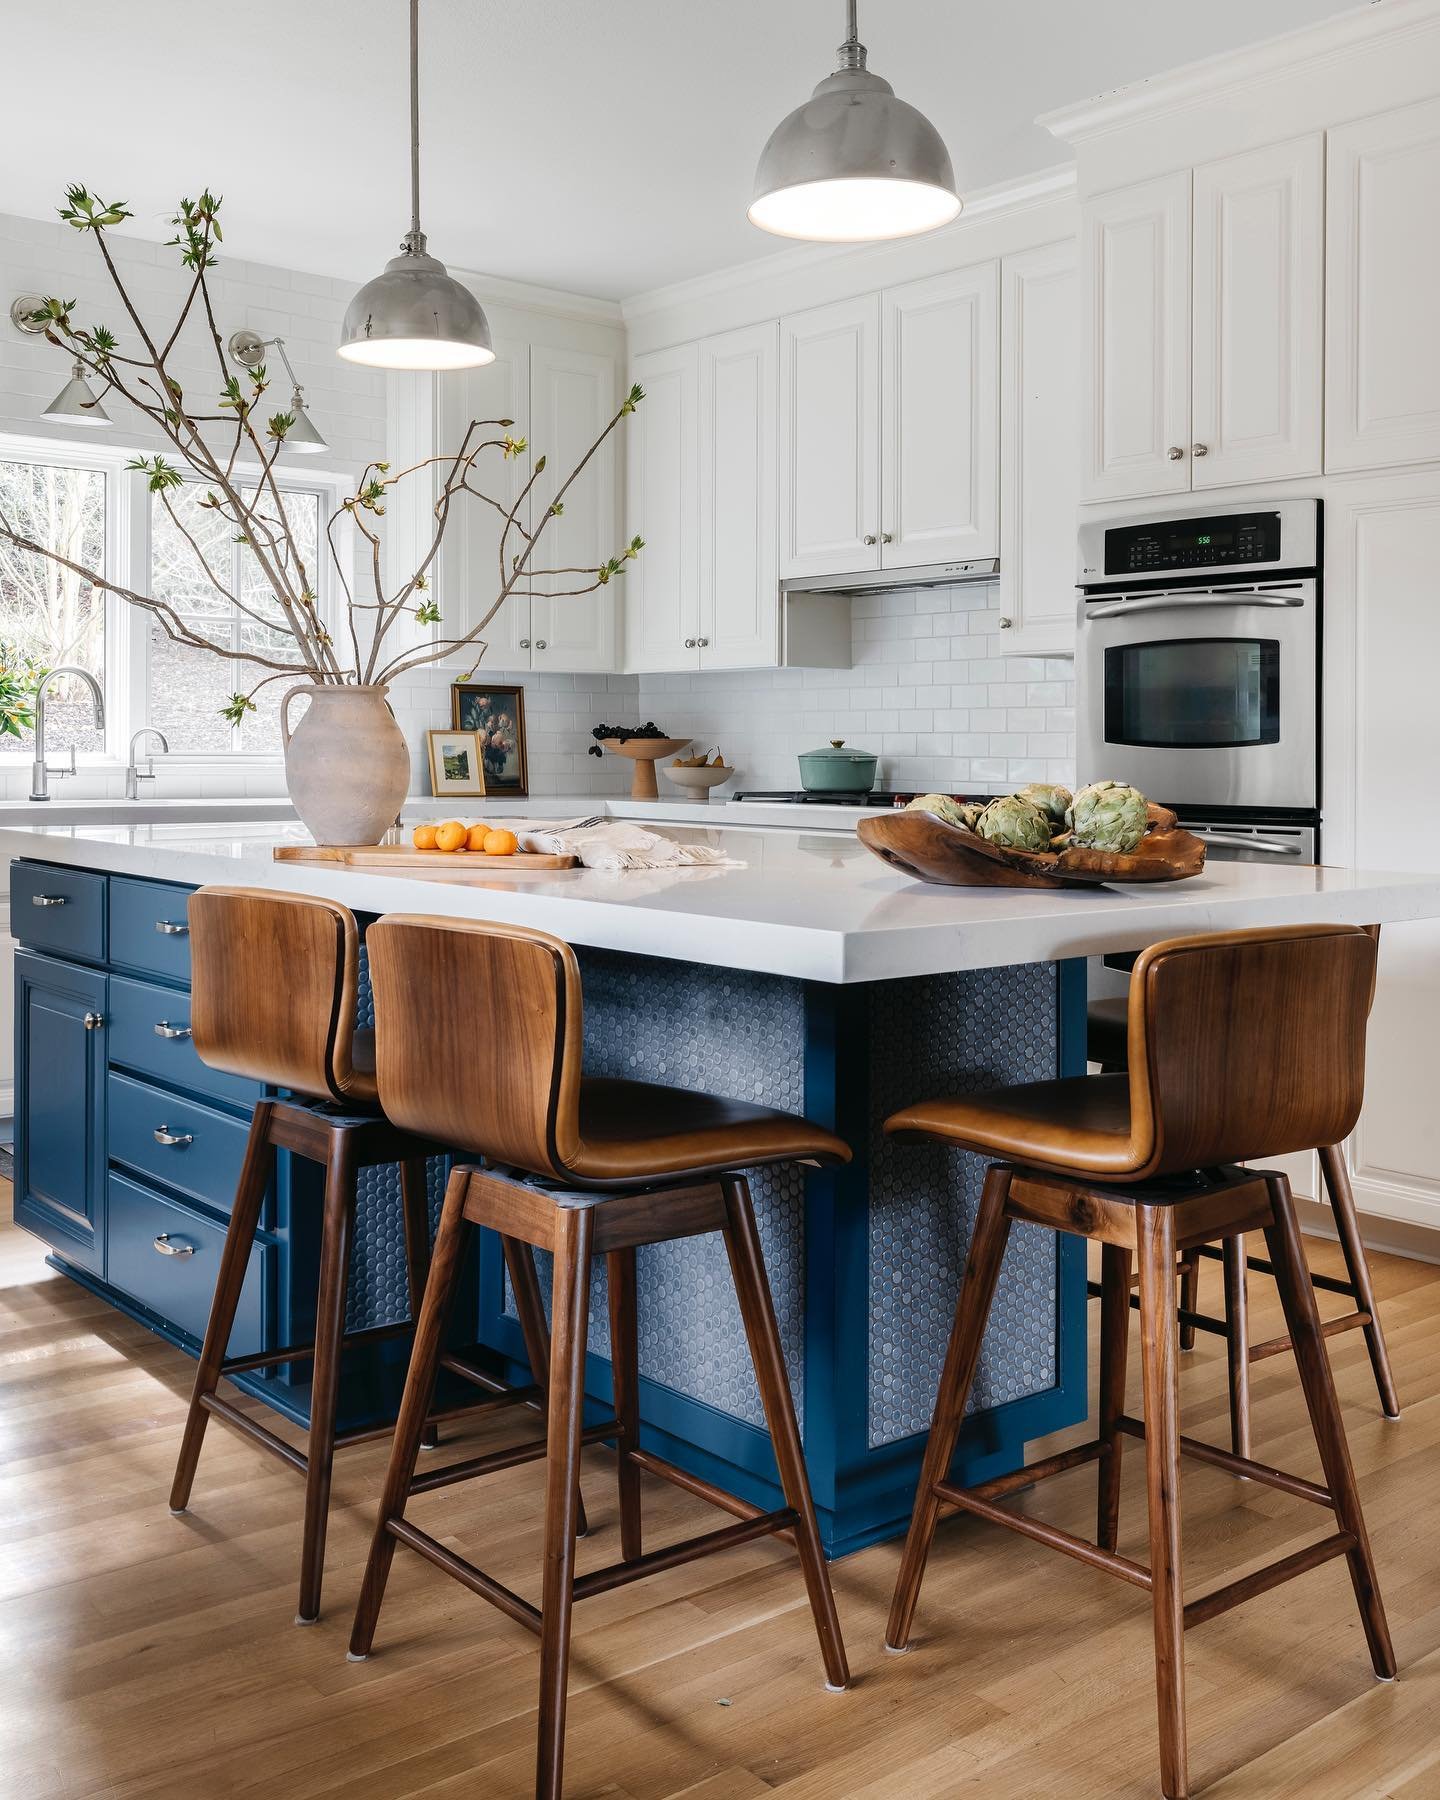 Sometimes a gut remodel isn&rsquo;t what you need for a kitchen refresh. In this kitchen, we kept the footprint and original cabinetry intact, and simply added a modern coat of paint, some new countertops and backsplash, and a fresh island with exten